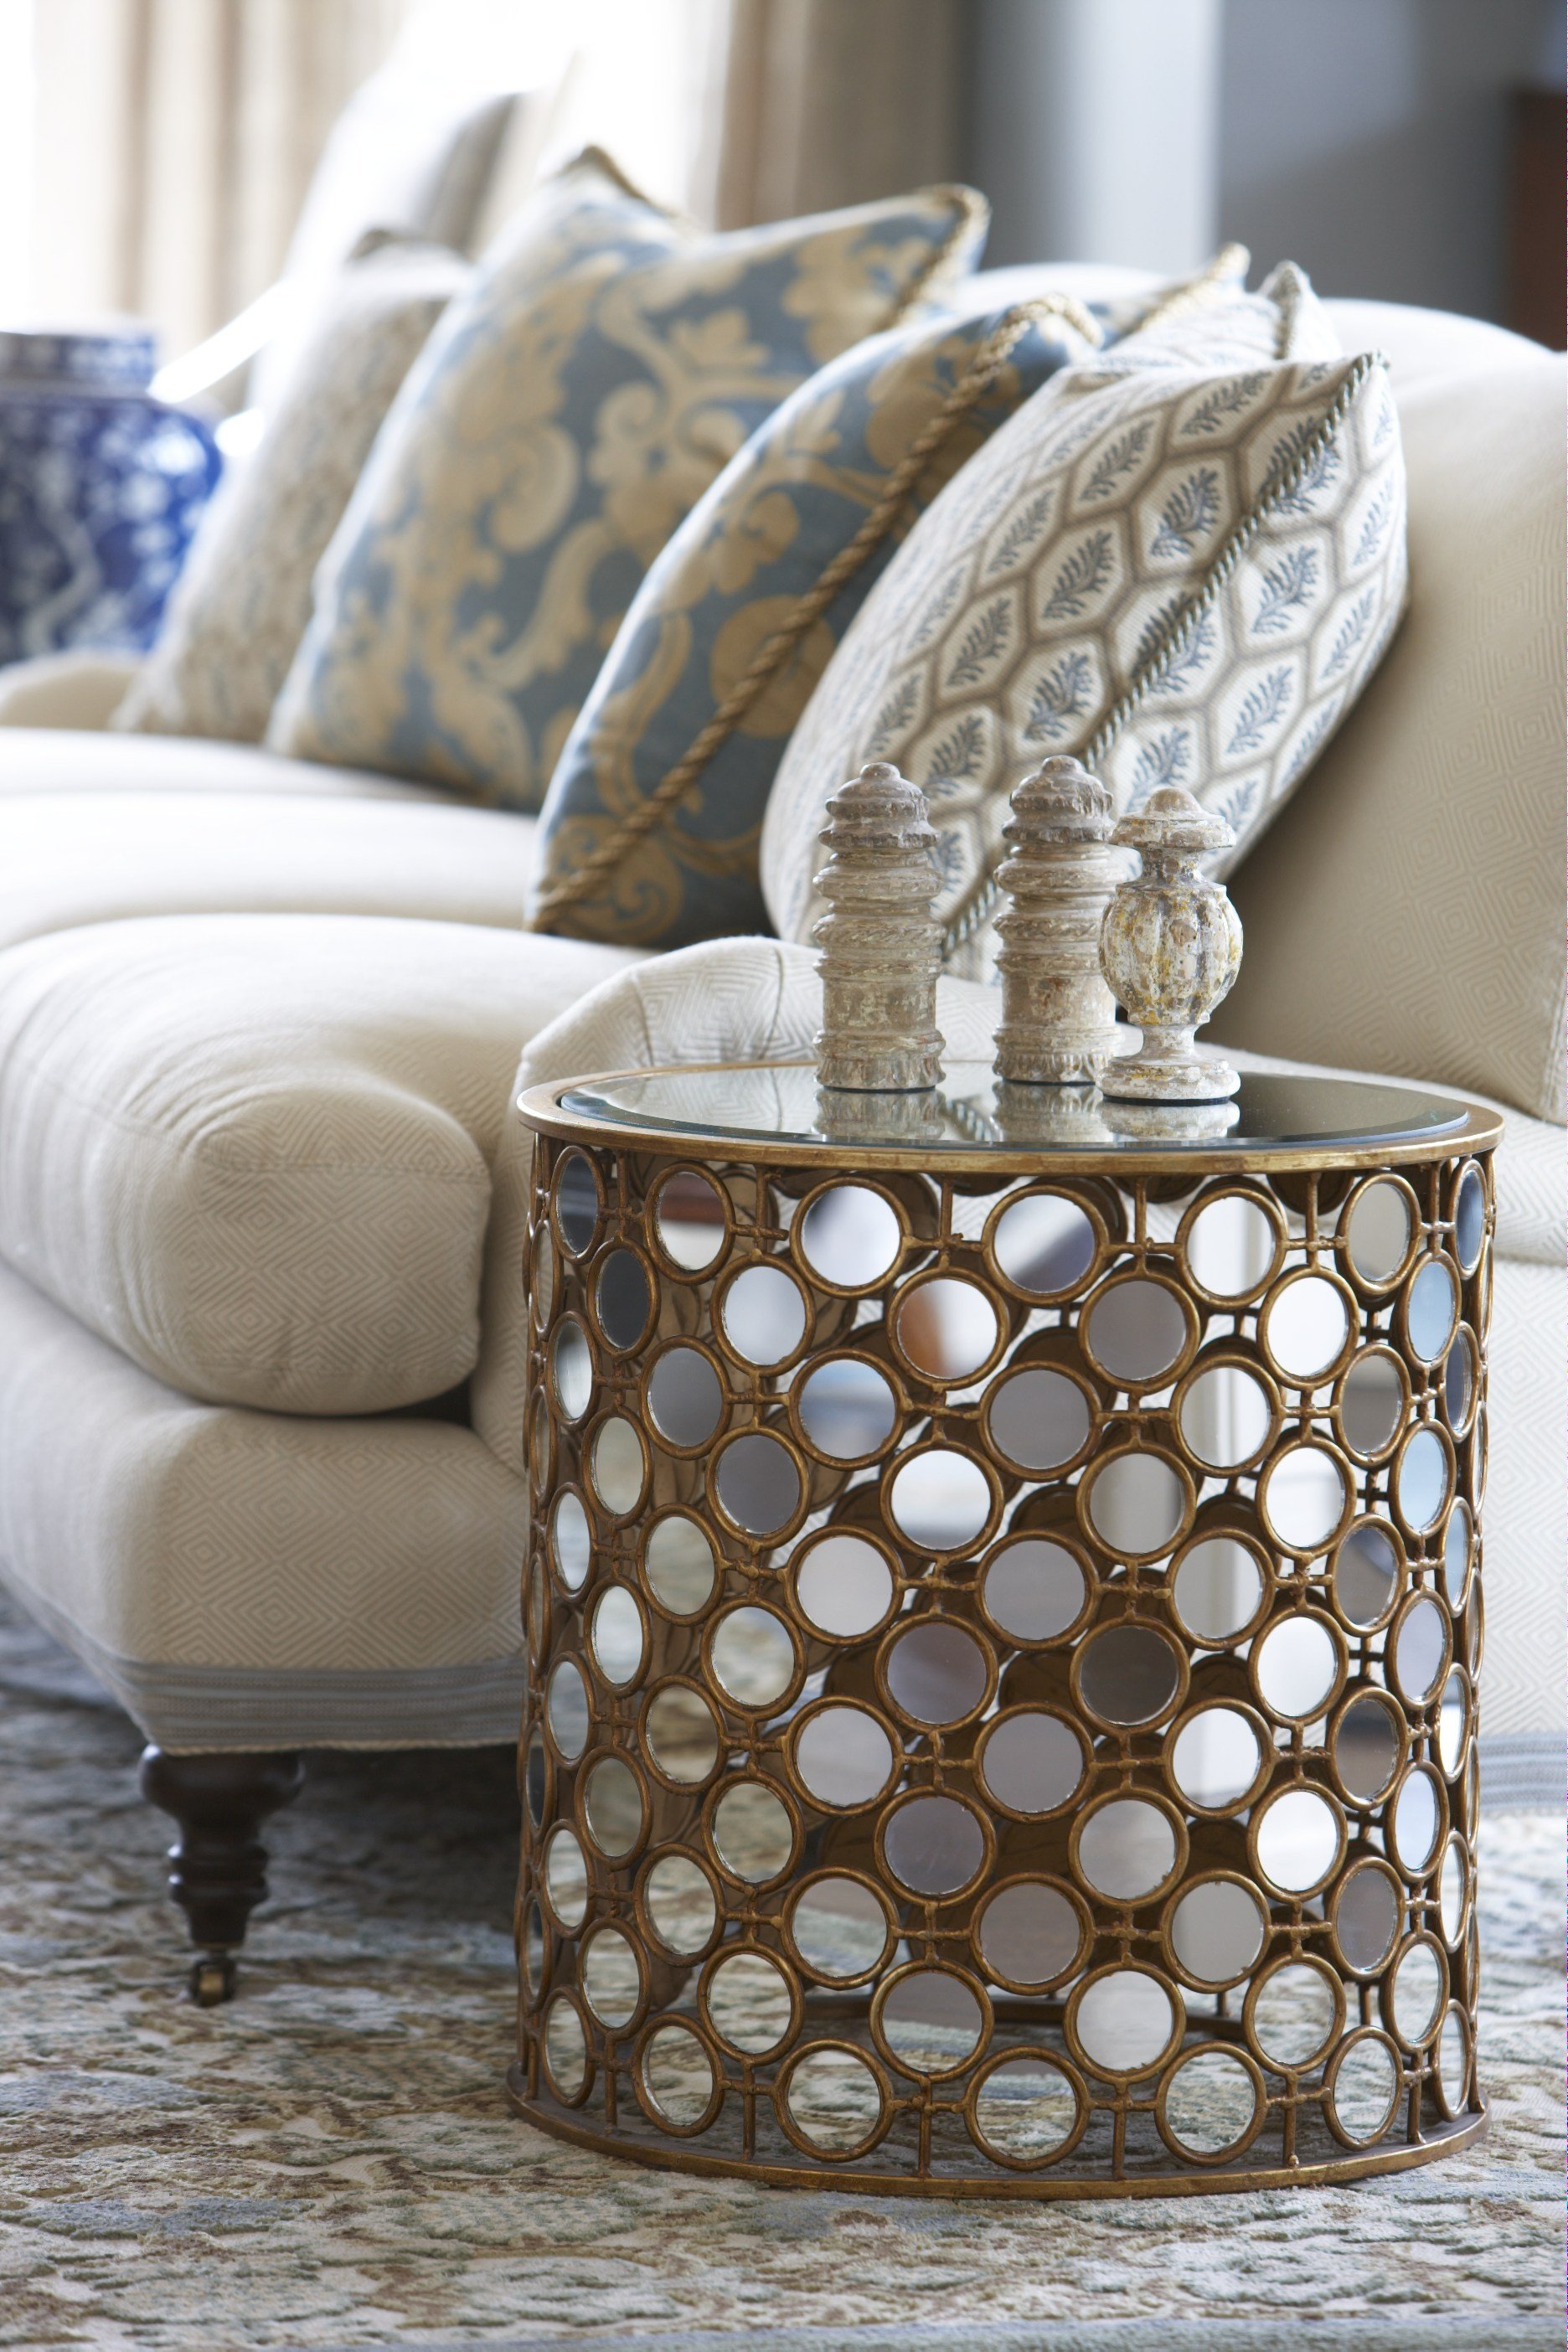 4-textured-side-table-patterned-accents-cream-blue-rinfret-interior-designs.jpg